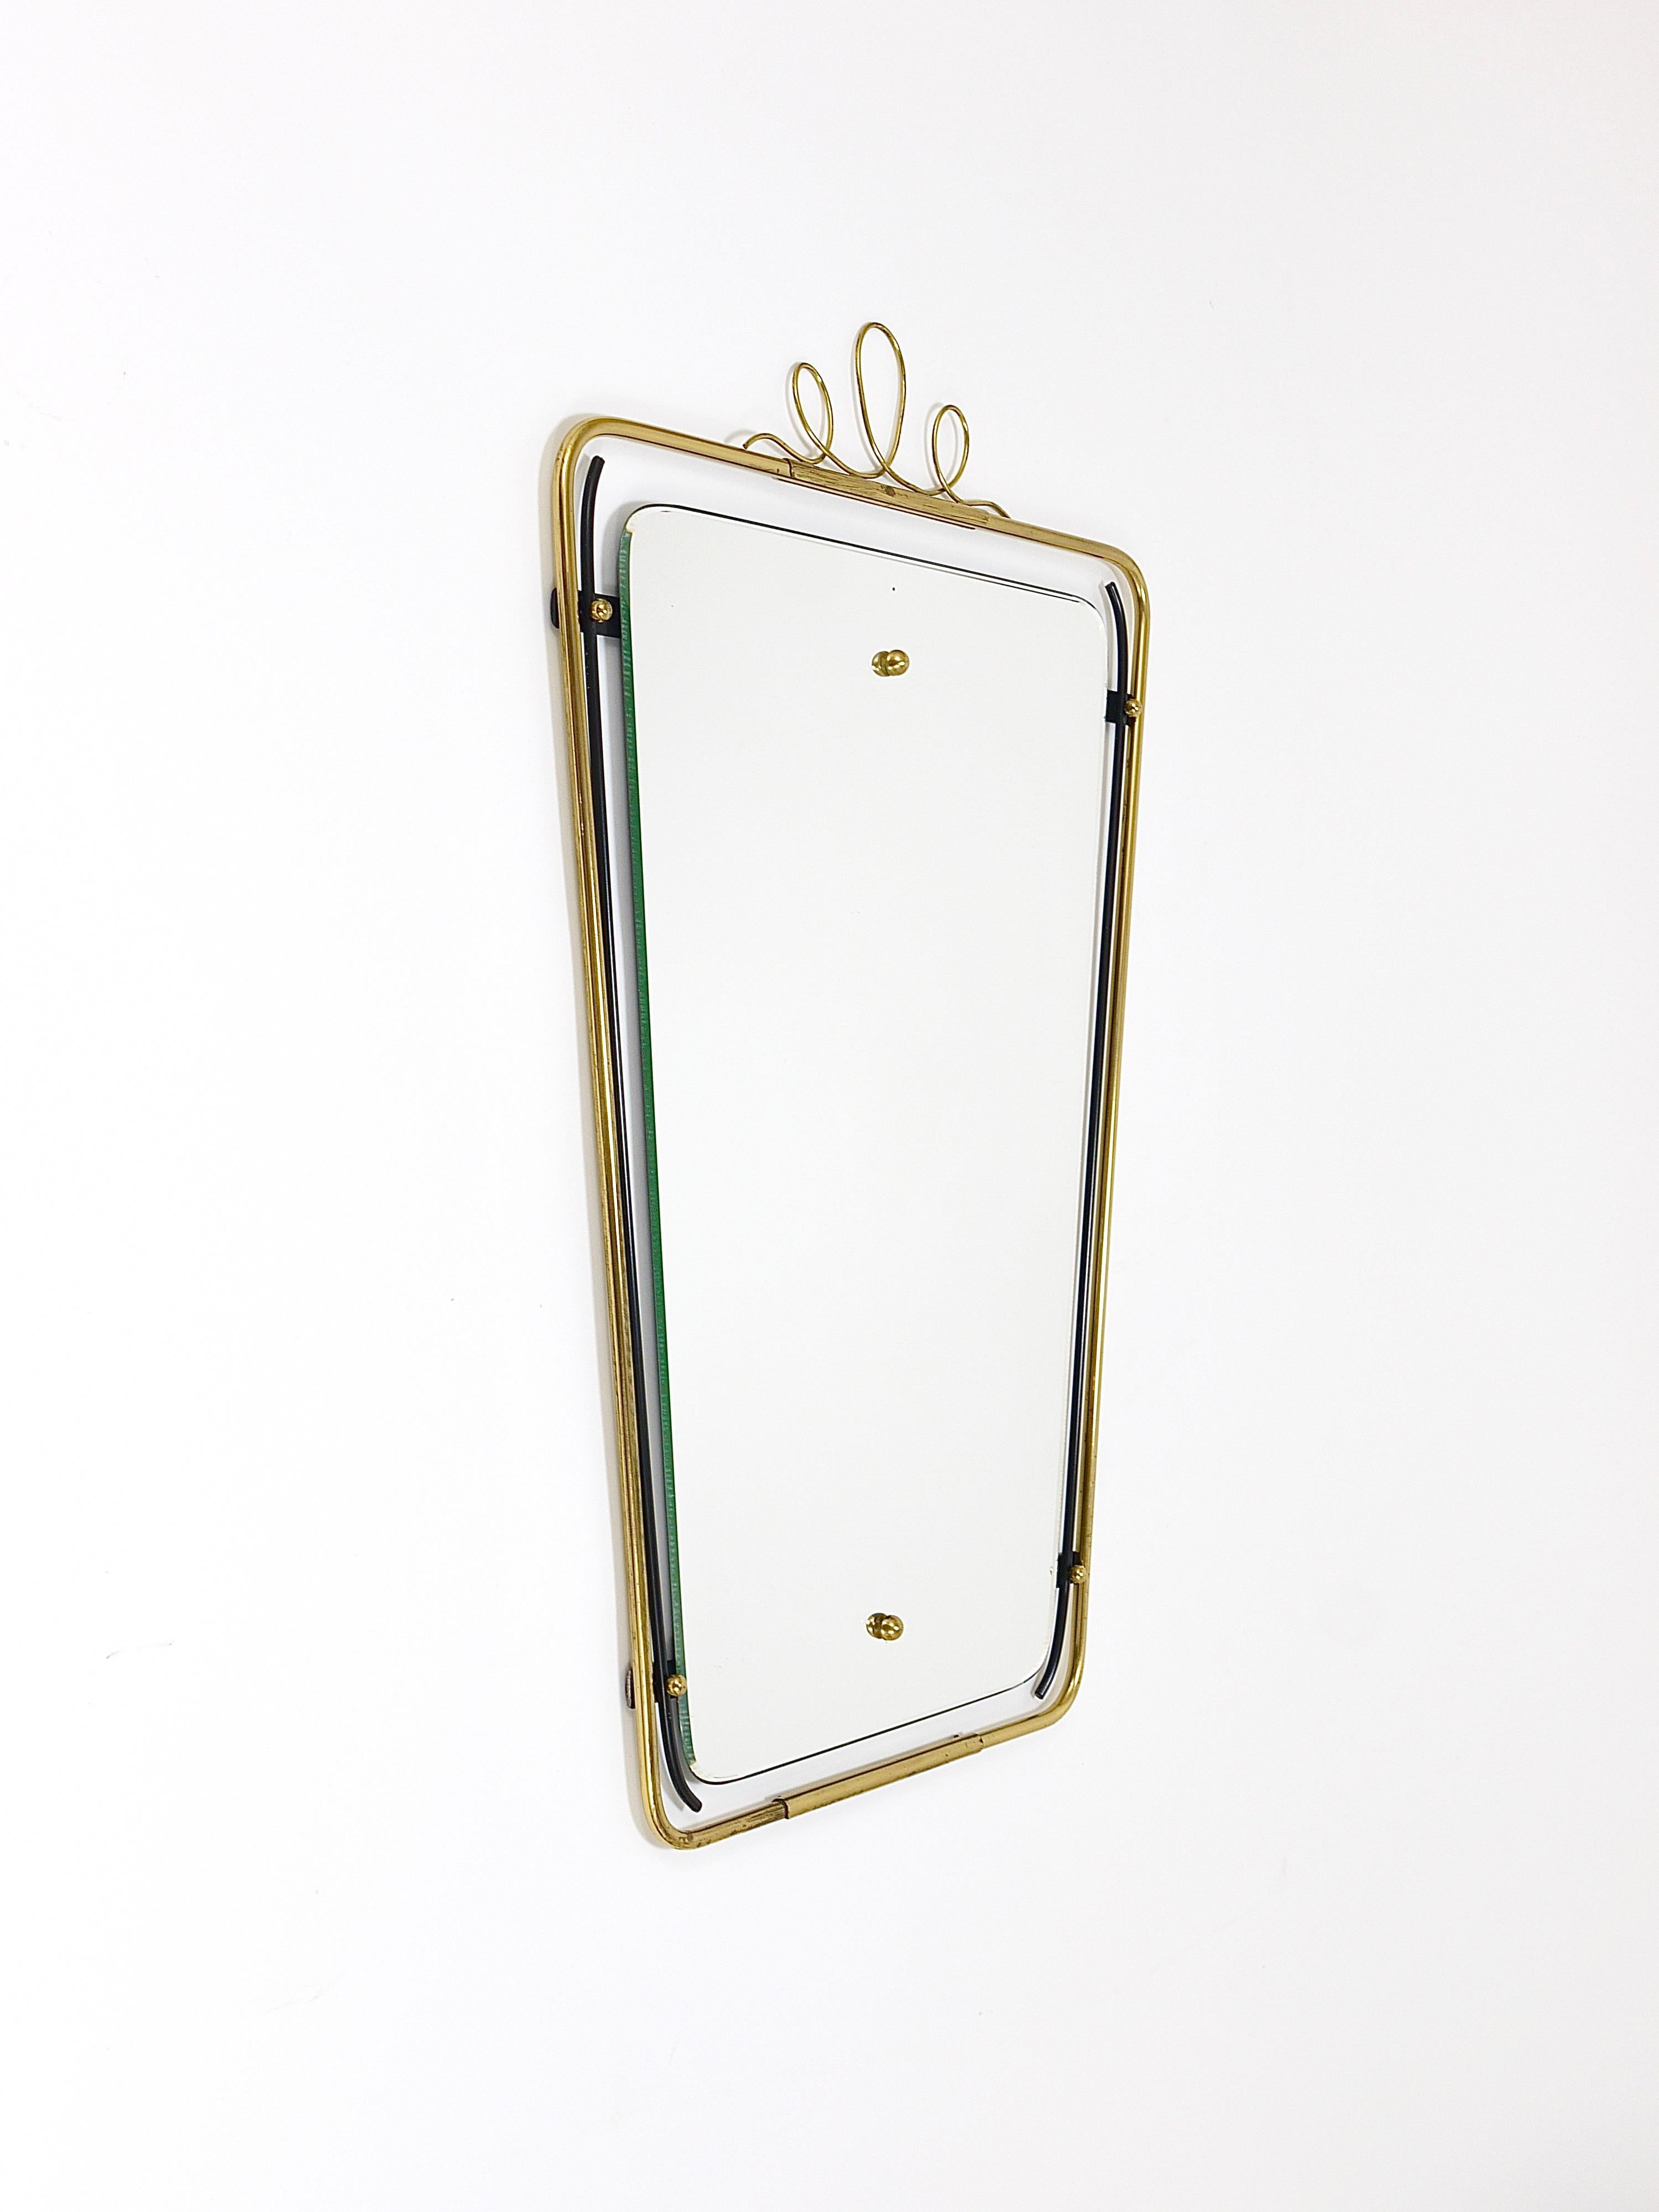 Midcentury Modern Brass Loops Wire Wall mirror, Italy, 1950s For Sale 1